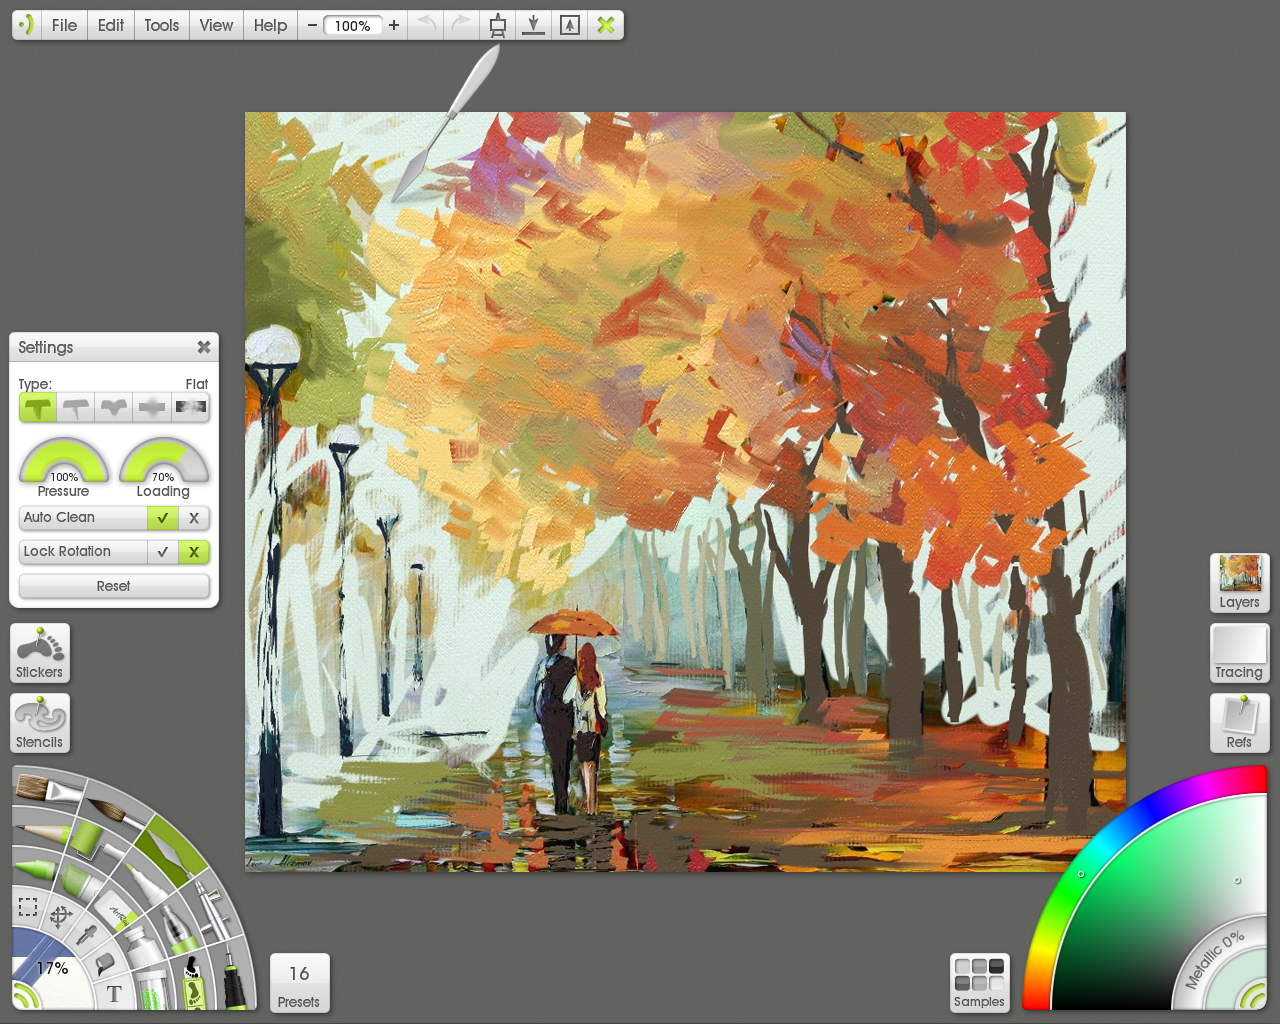 discount coupon for artrage 6